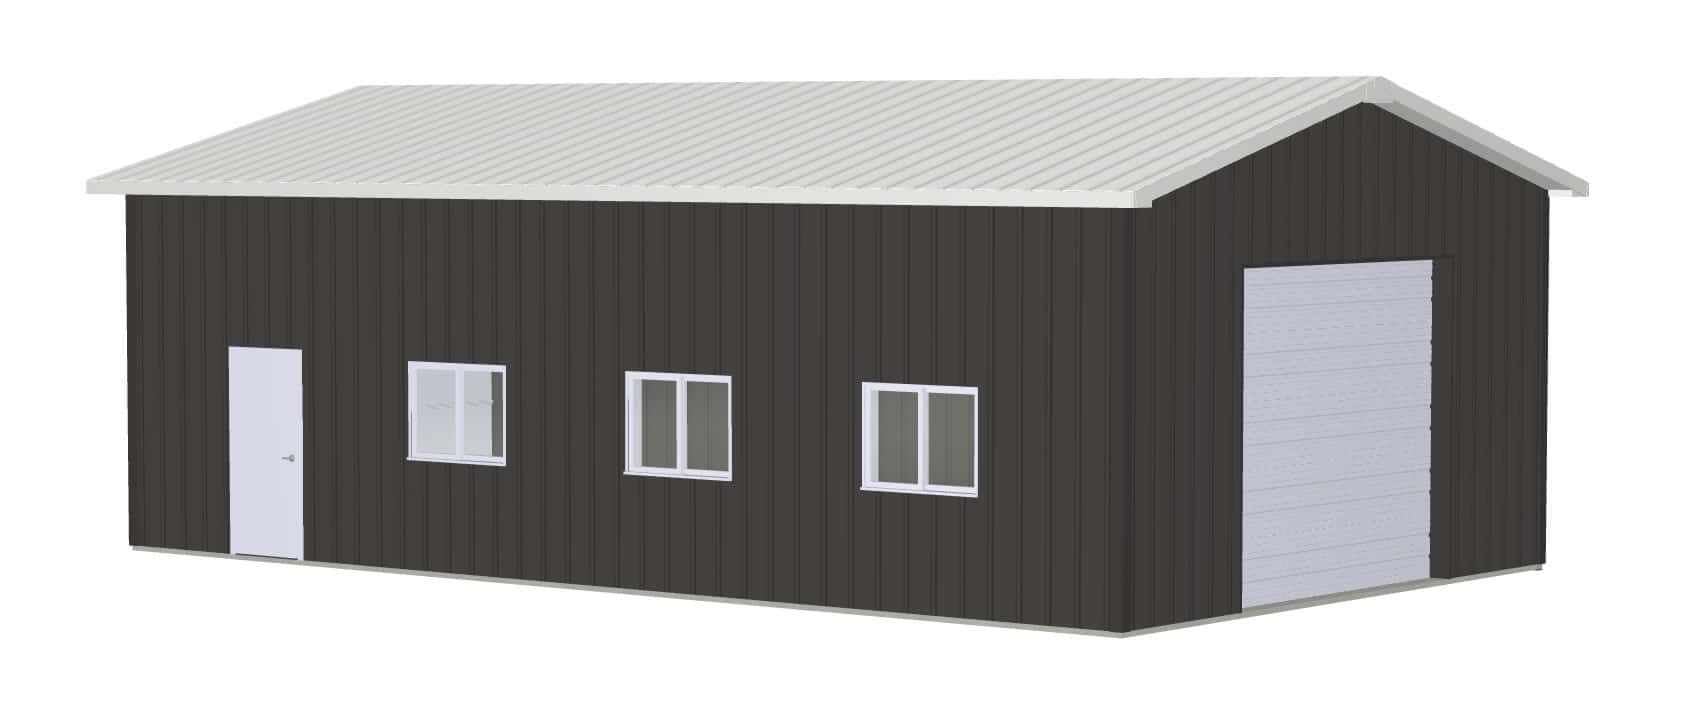 Read more about the article Wyoming Prefab Garages